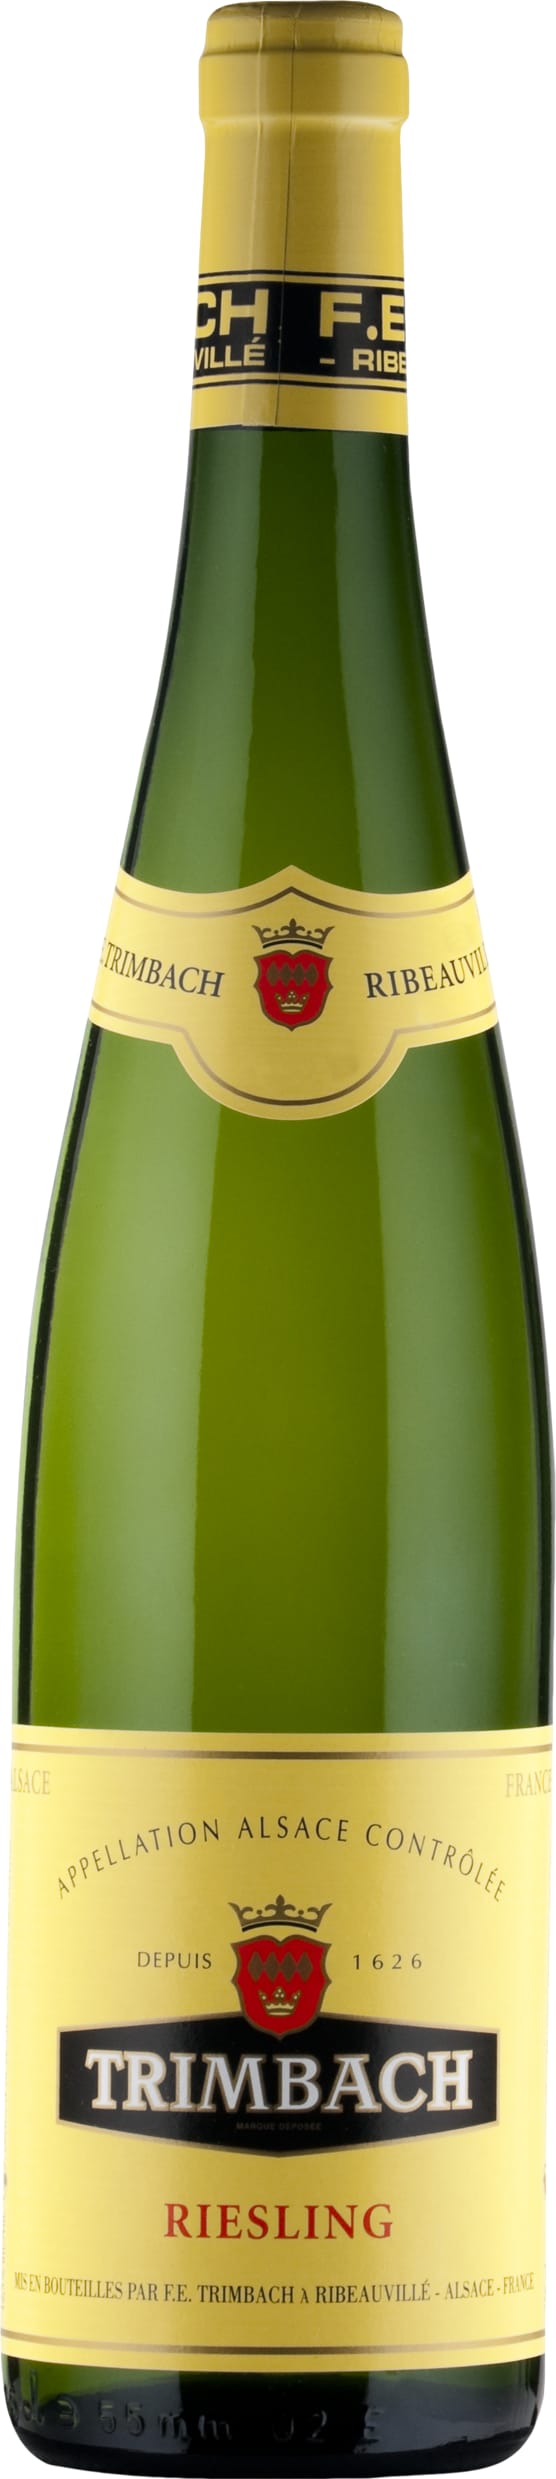 Trimbach Riesling 2019 75cl - Buy Trimbach Wines from GREAT WINES DIRECT wine shop